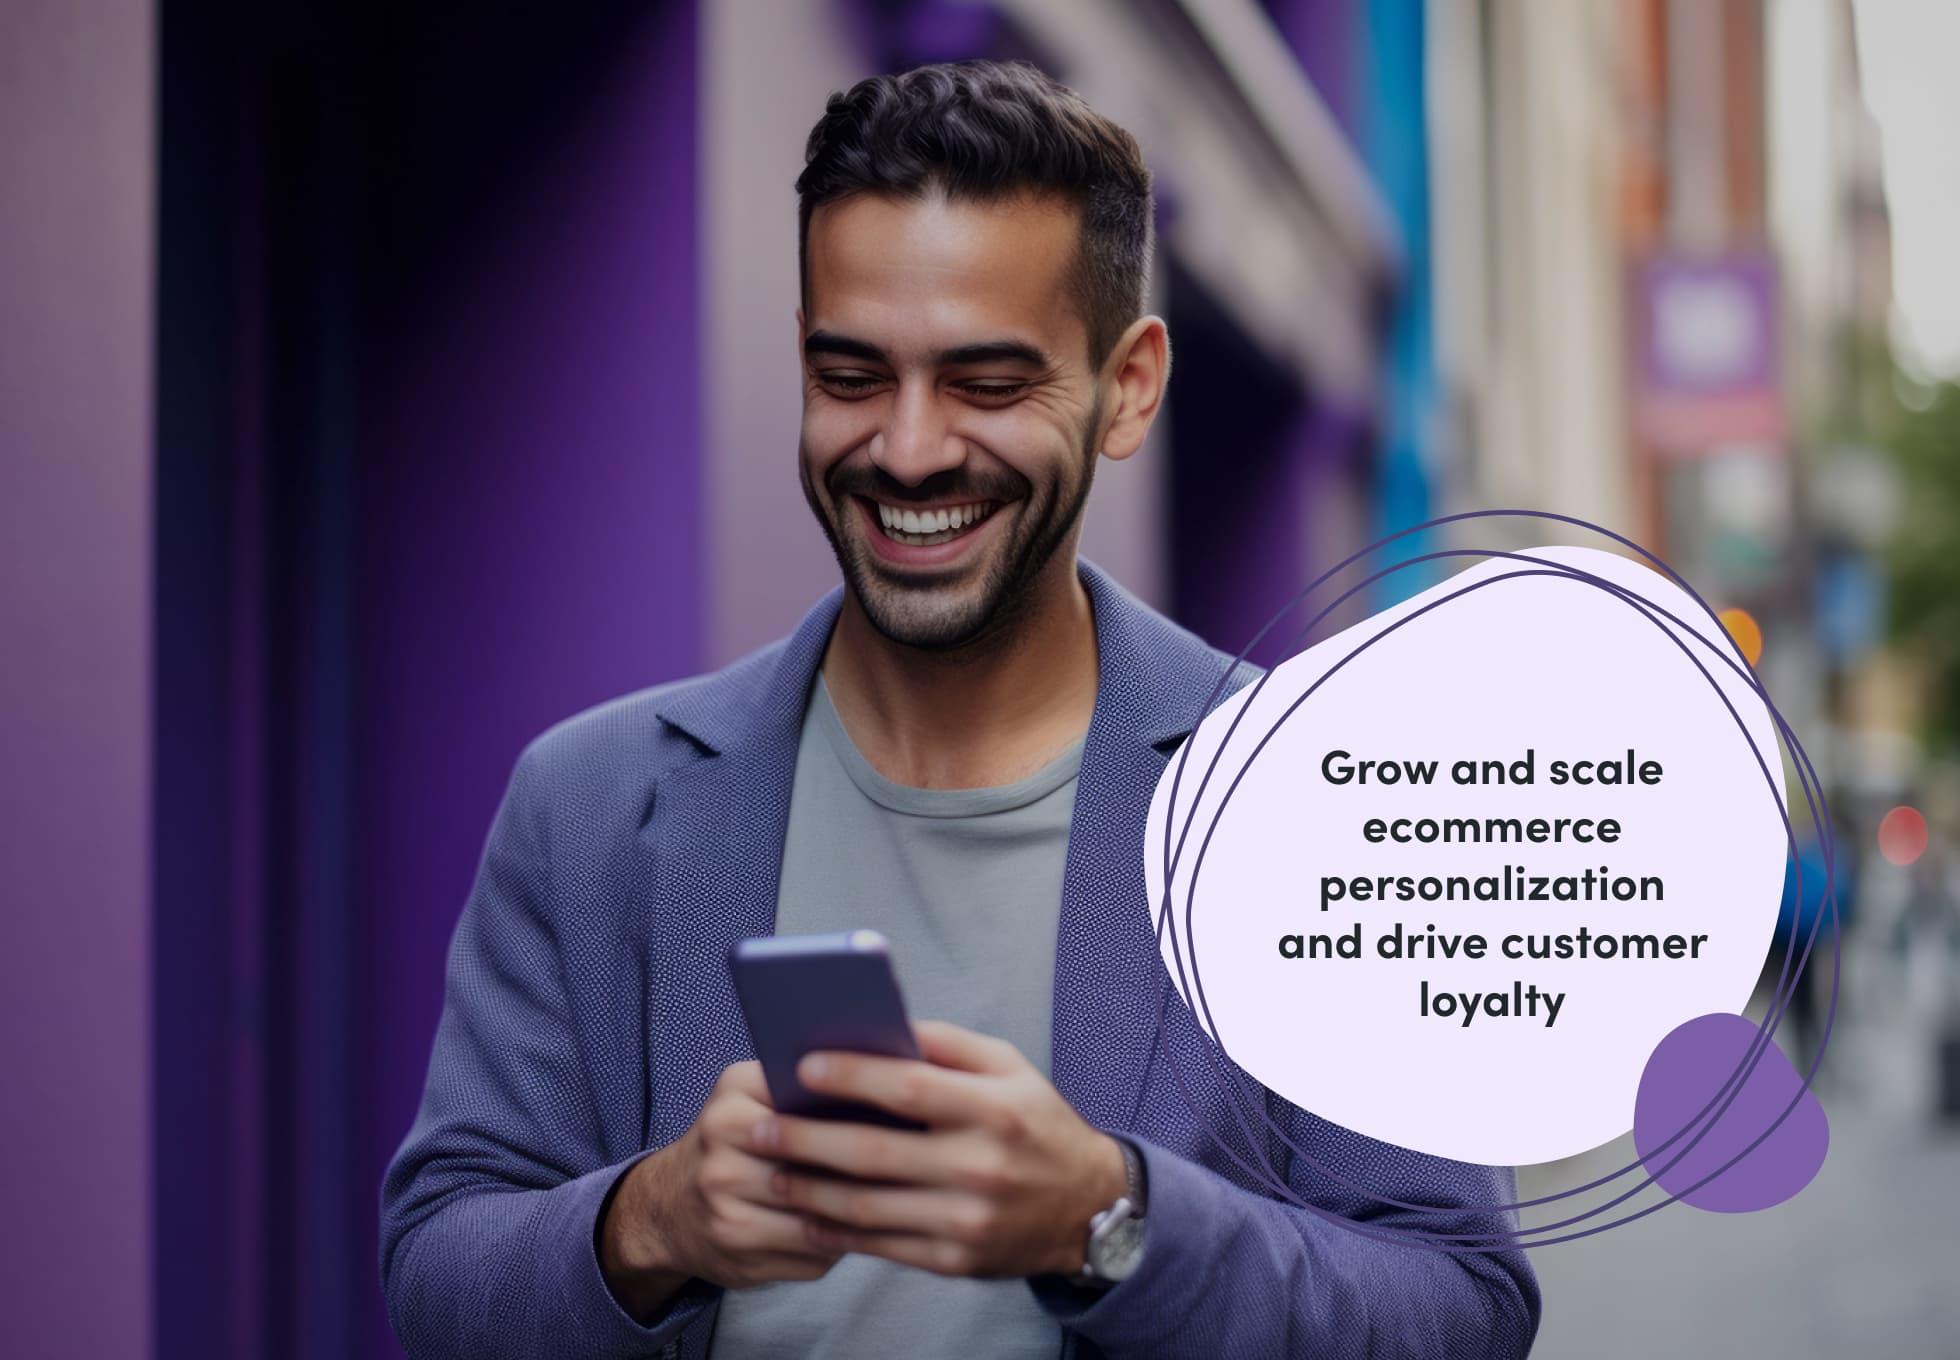 A person walking down a street and smiling while looking at their phone. A sentenced imposed over top the image says, "Grow and scale ecommerce personalization and driver customer loyalty."